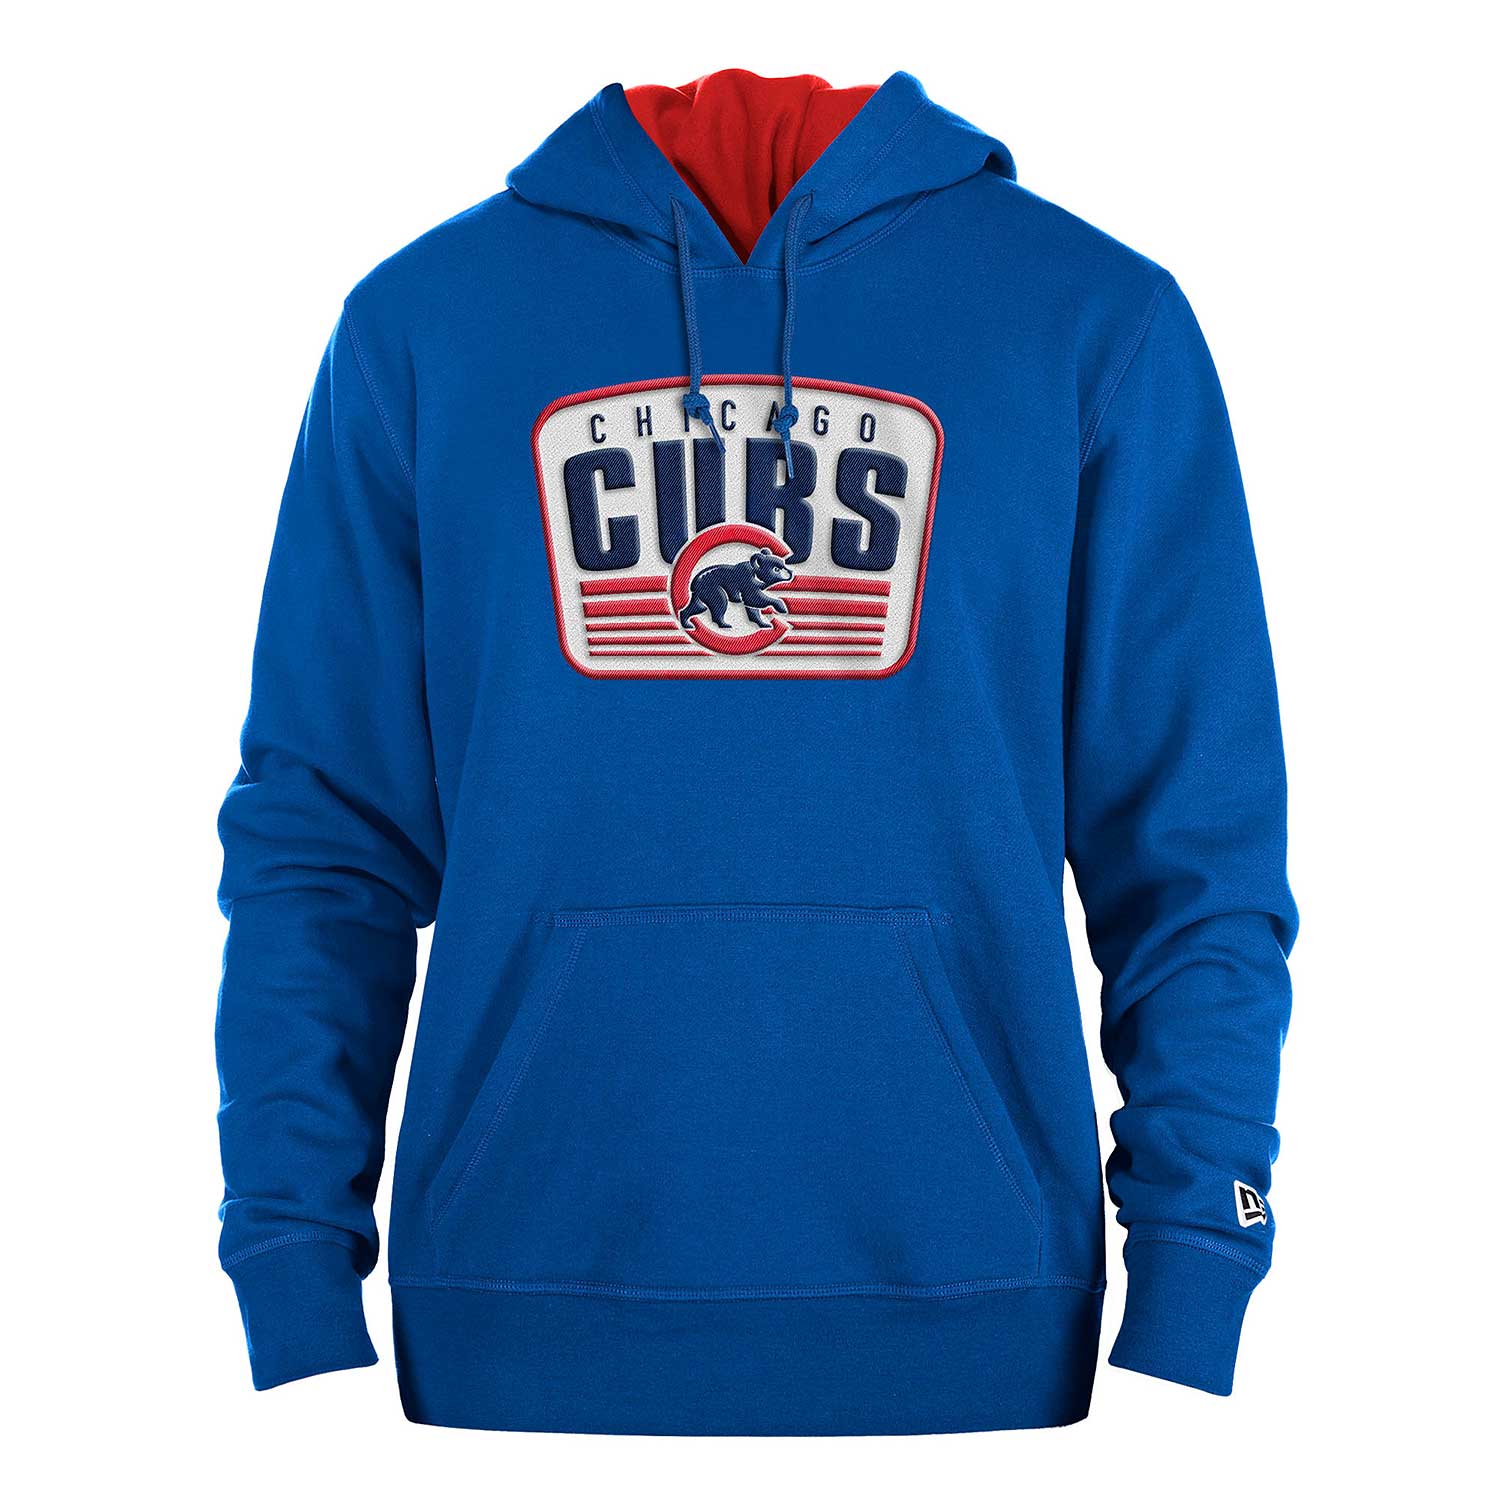 New Era Cap Chicago Cubs Game Day Two Sided Hooded Sweatshirt Small